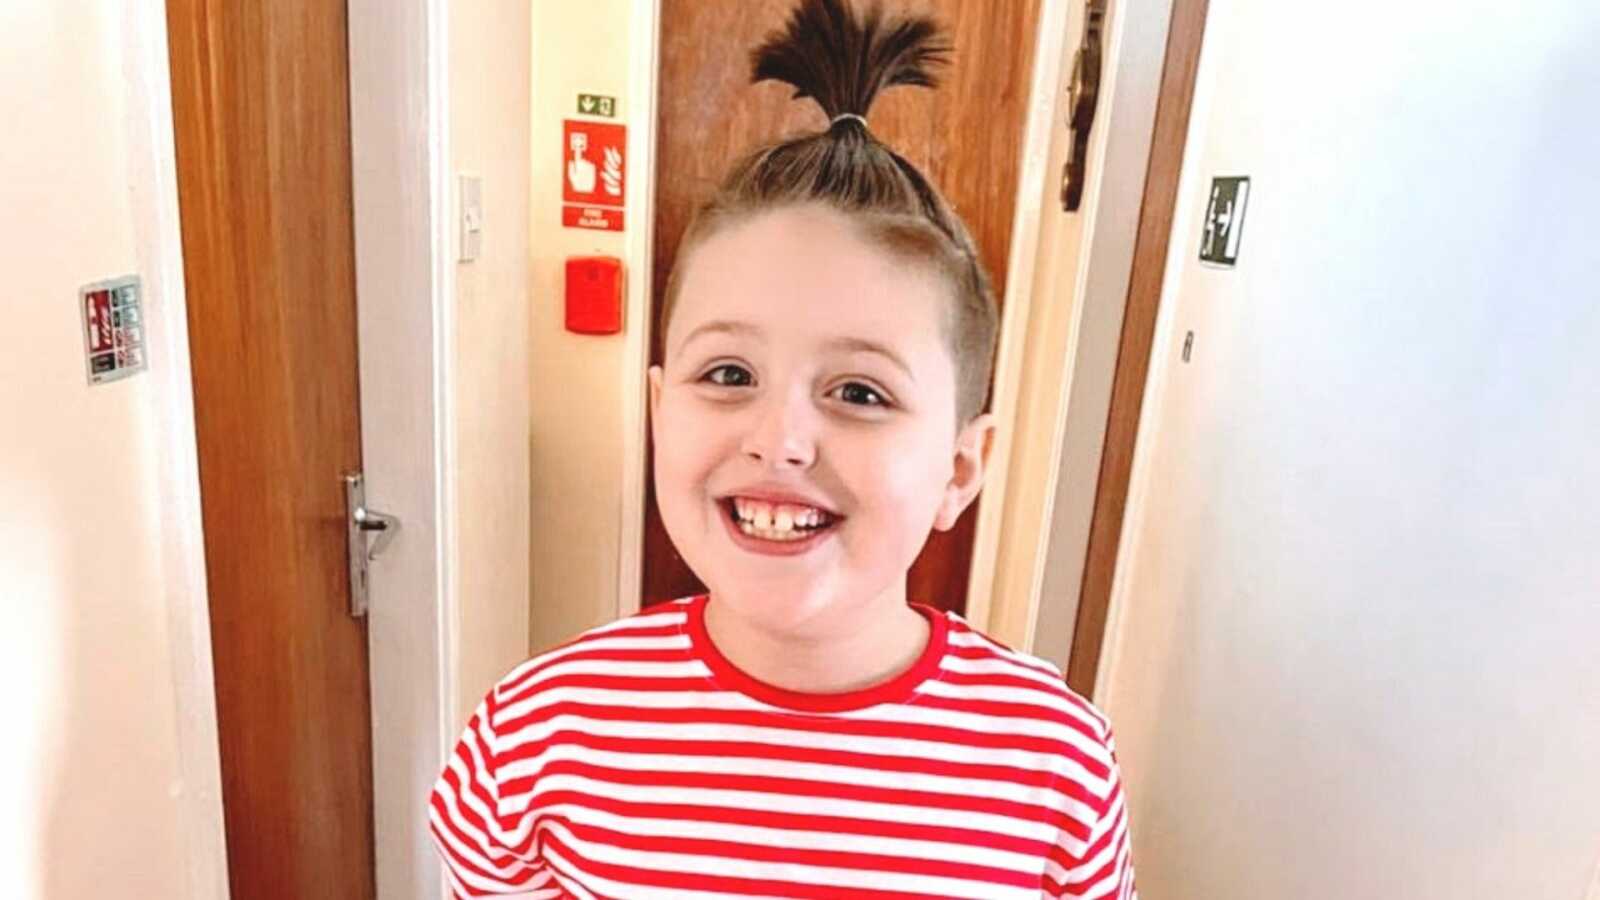 Boy with autism wearing red striped shirt